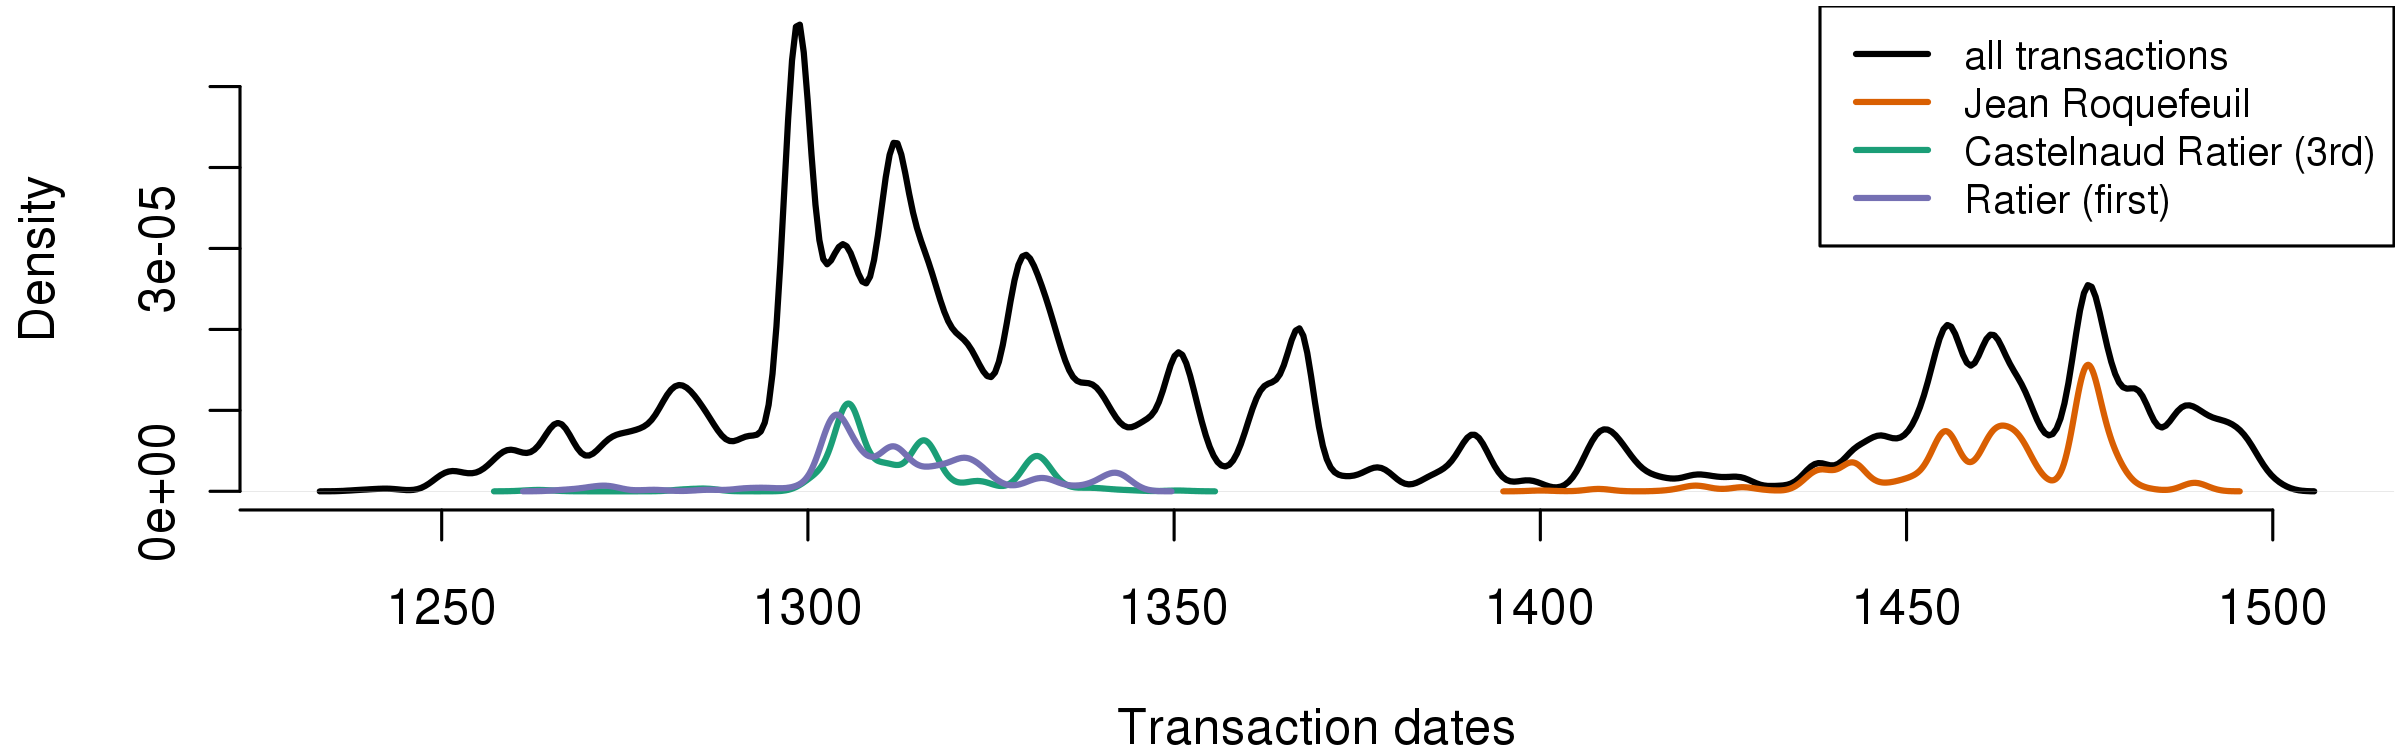 Transaction dates distribution with the three main lords.